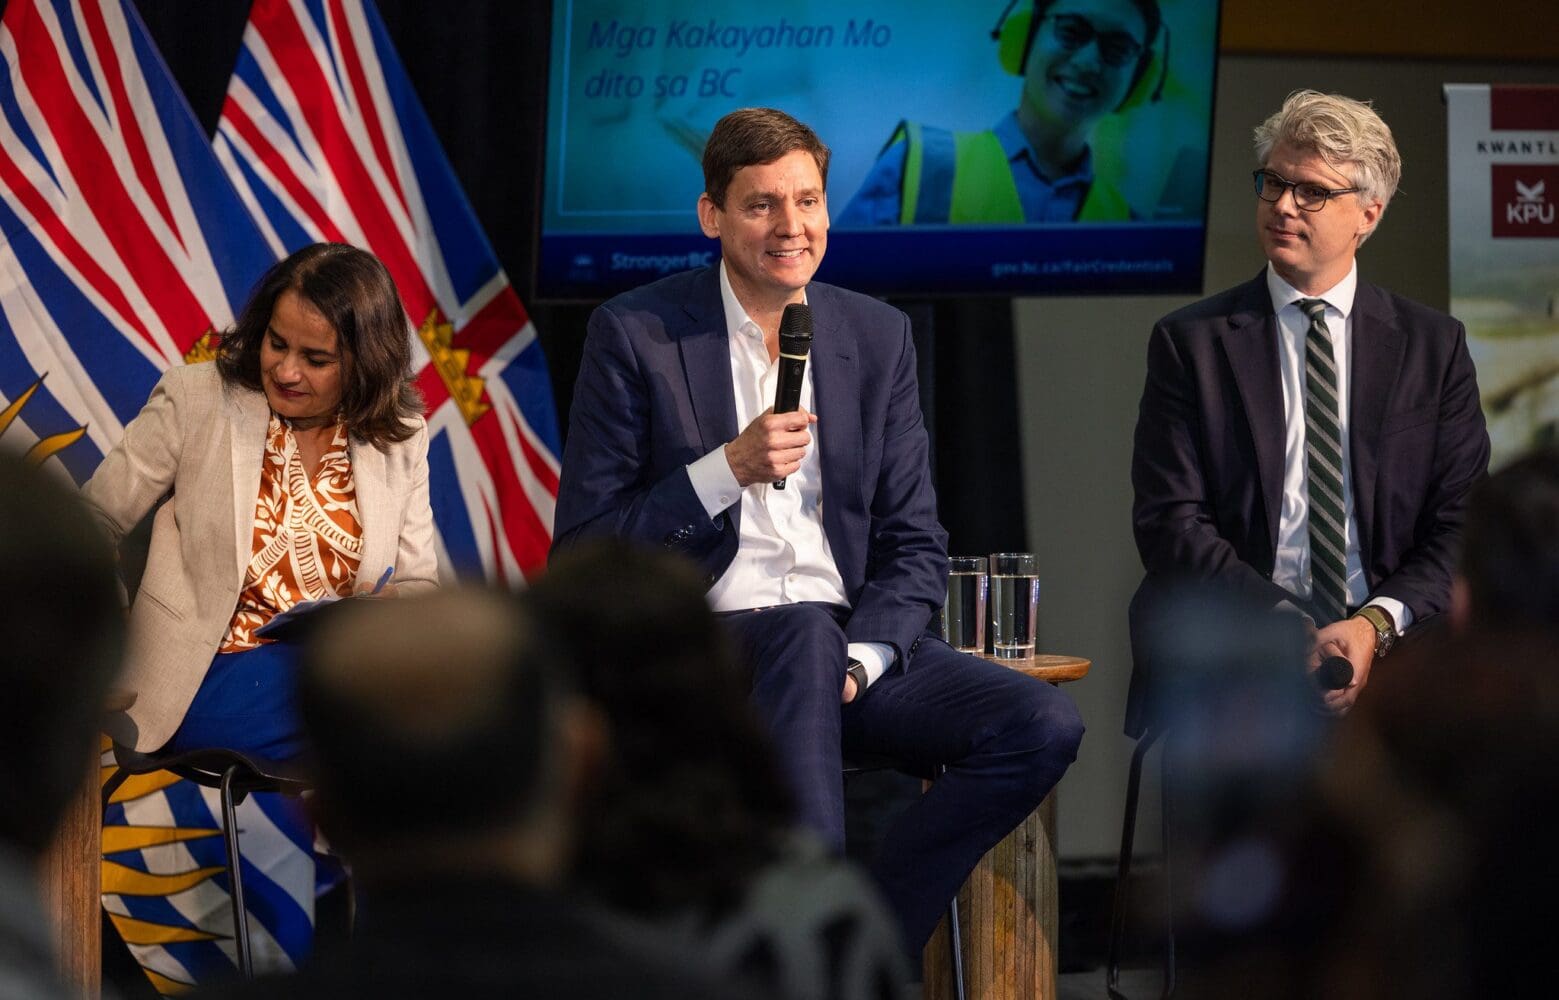 Statement on David Eby’s announcement on recognizing foreign qualifications in B.C.